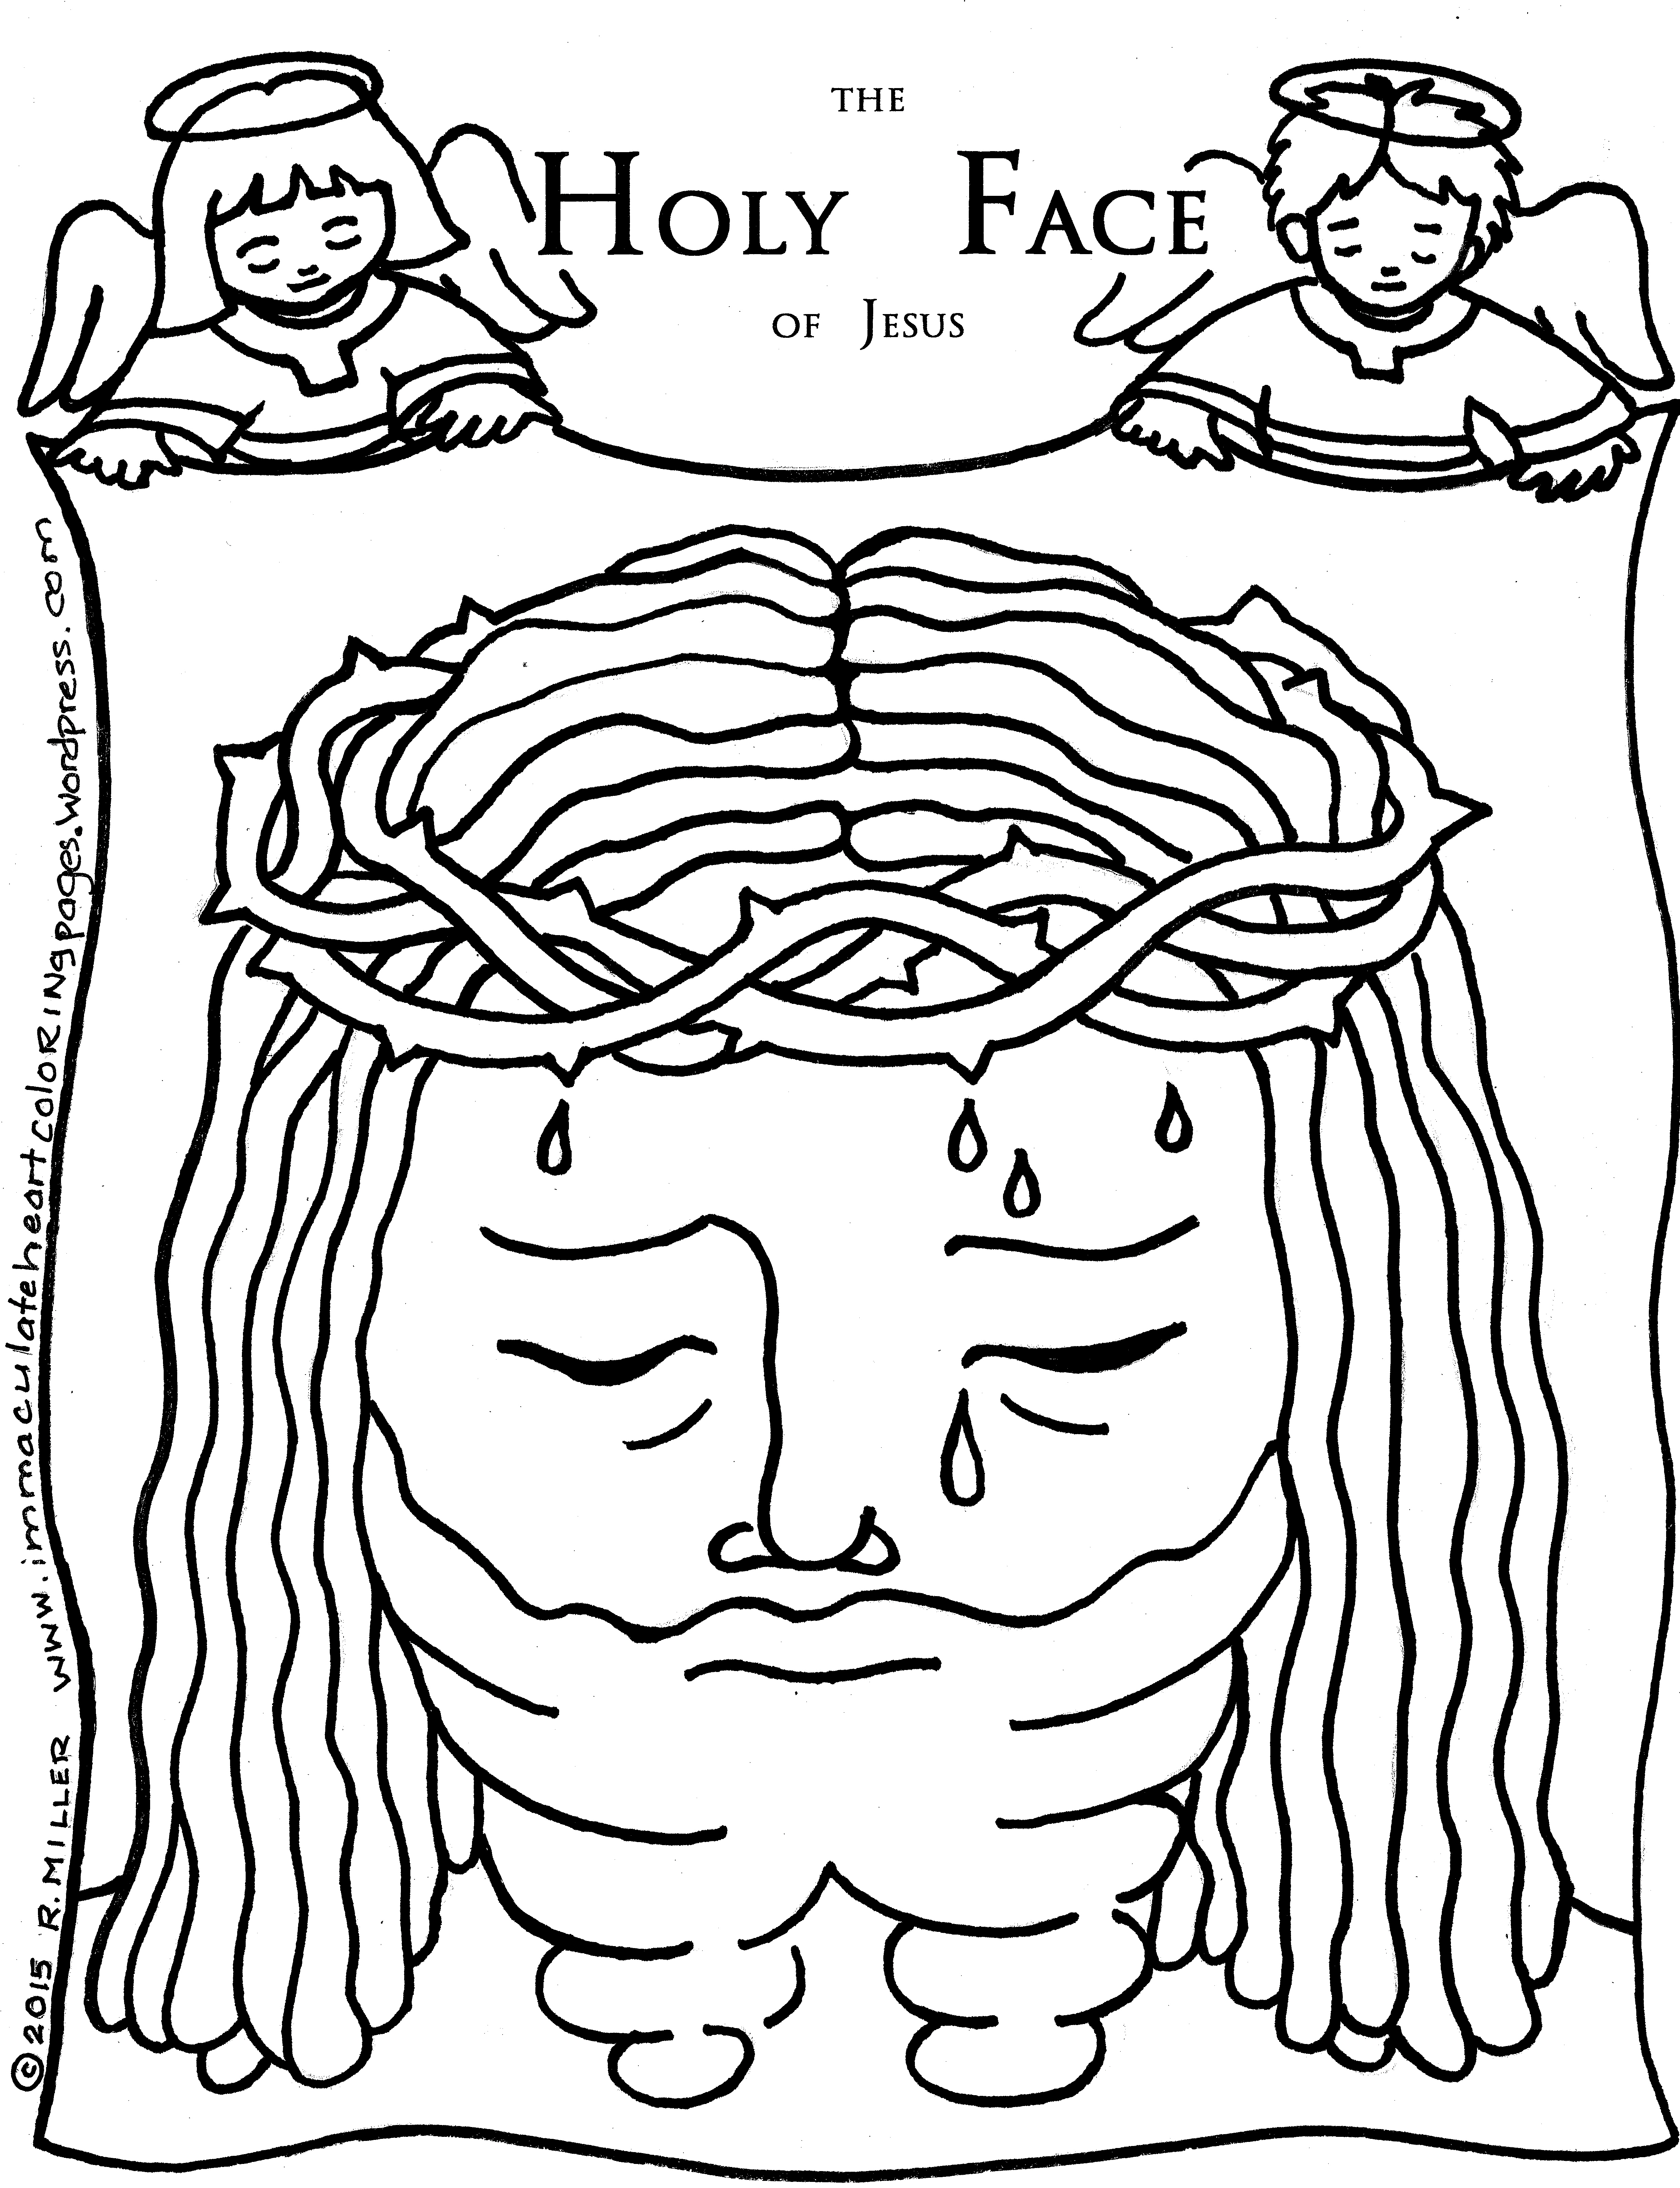 Holy face coloring page â immaculate heart coloring pages